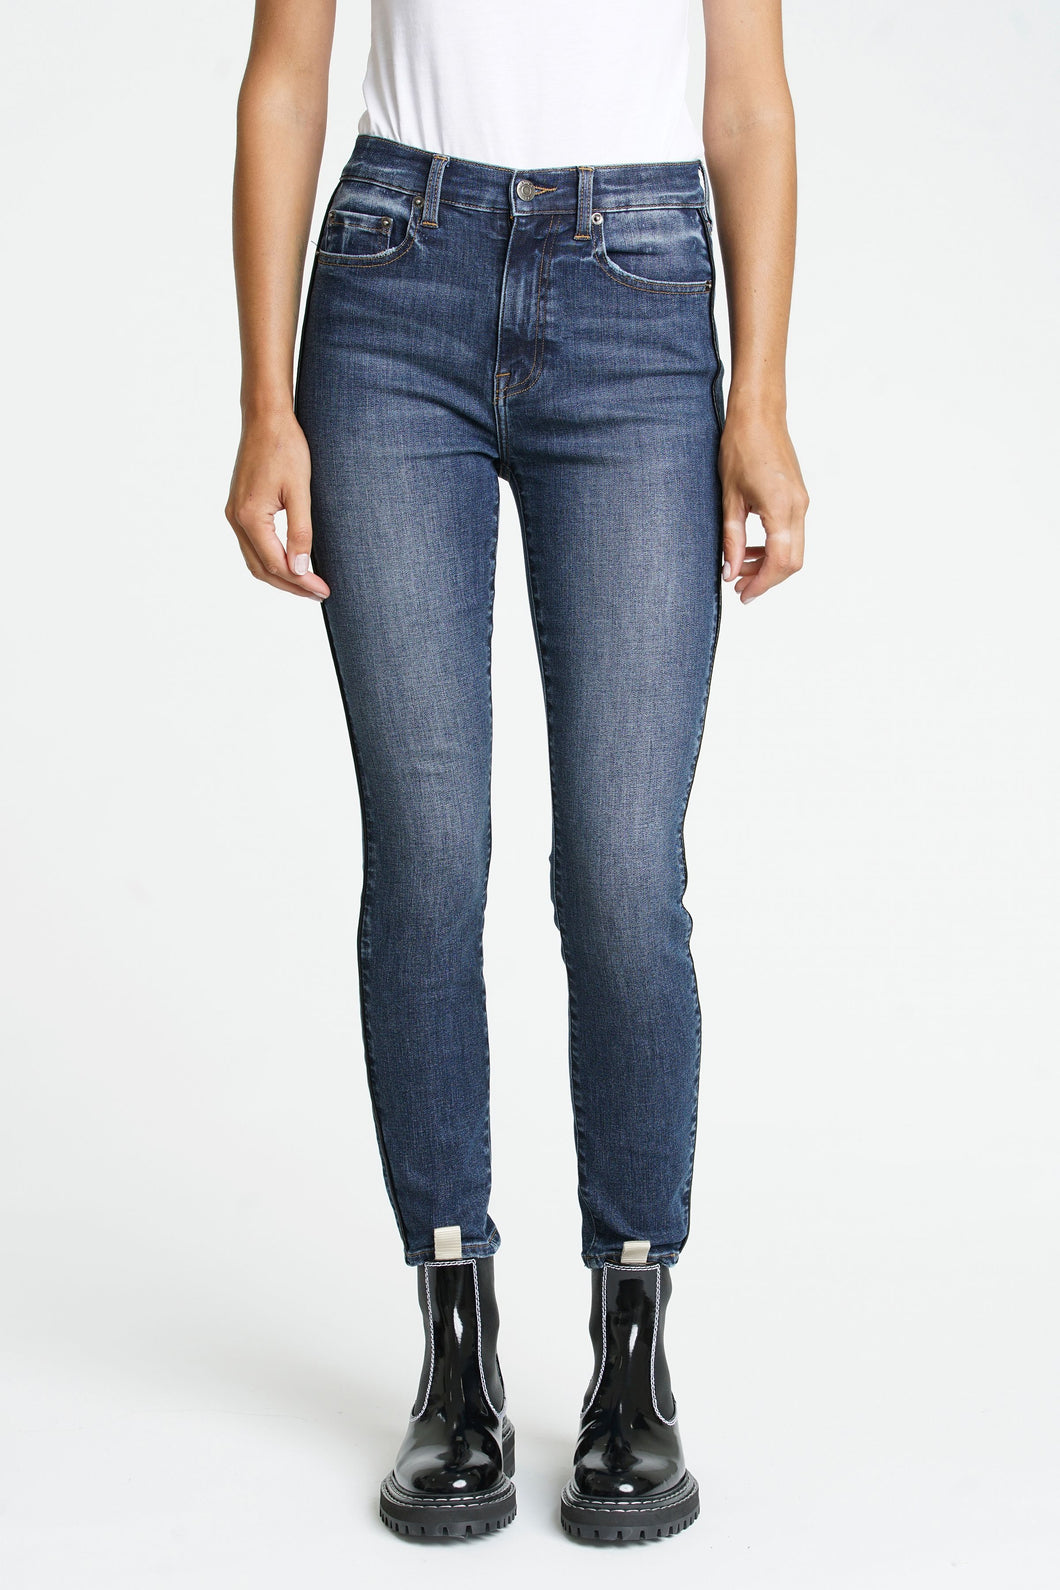 Pistola Aline High Rise Skinny in Extra Extra - FINAL SALE